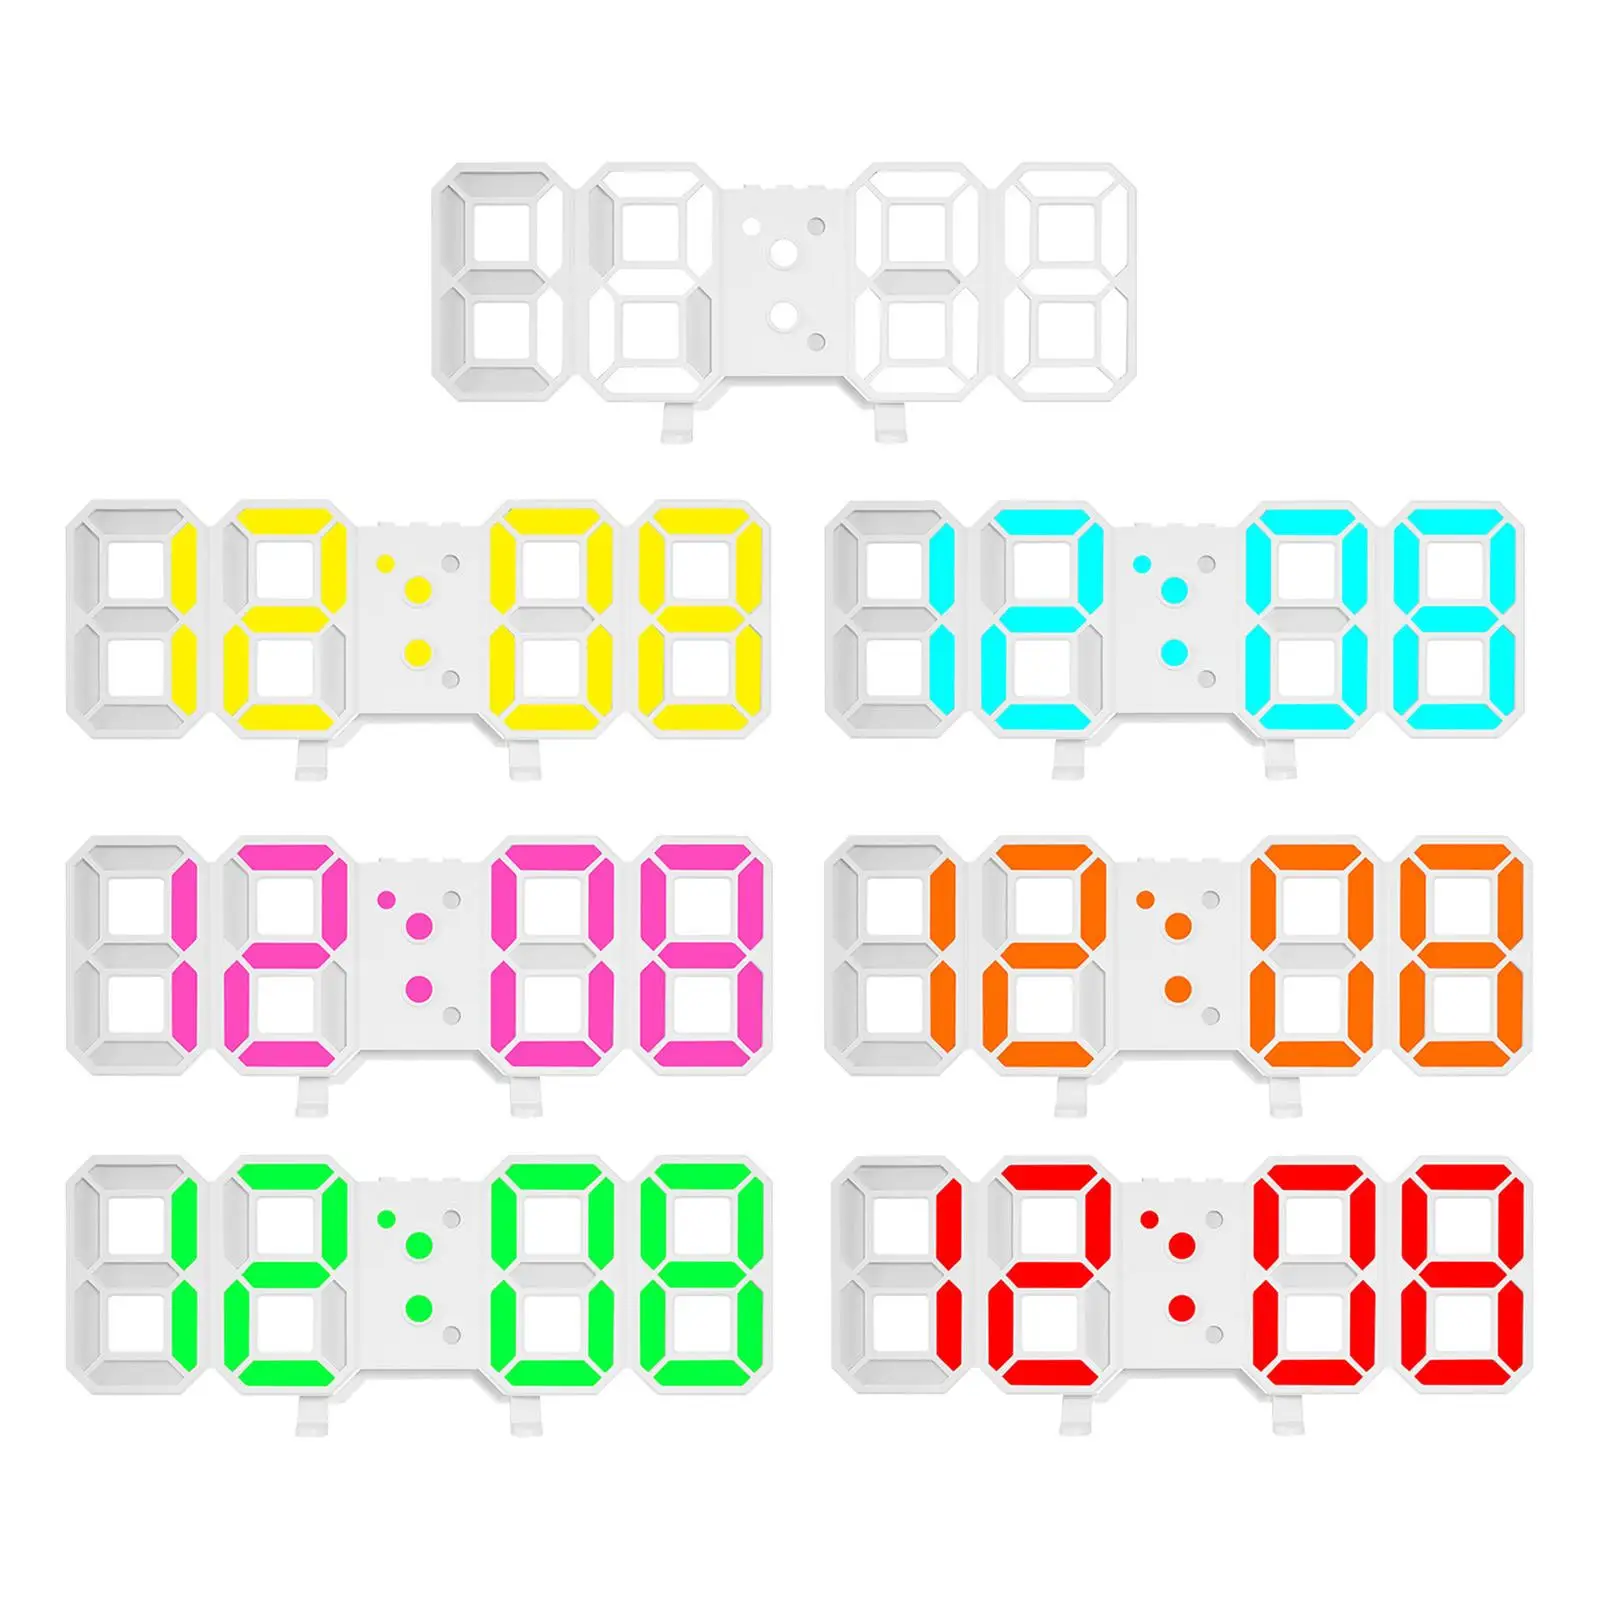 3D Digital Wall Clock LED Minimalistic Date Time Modern with Temperature Electronic Clock for Office Farmhouse Home Decor Table